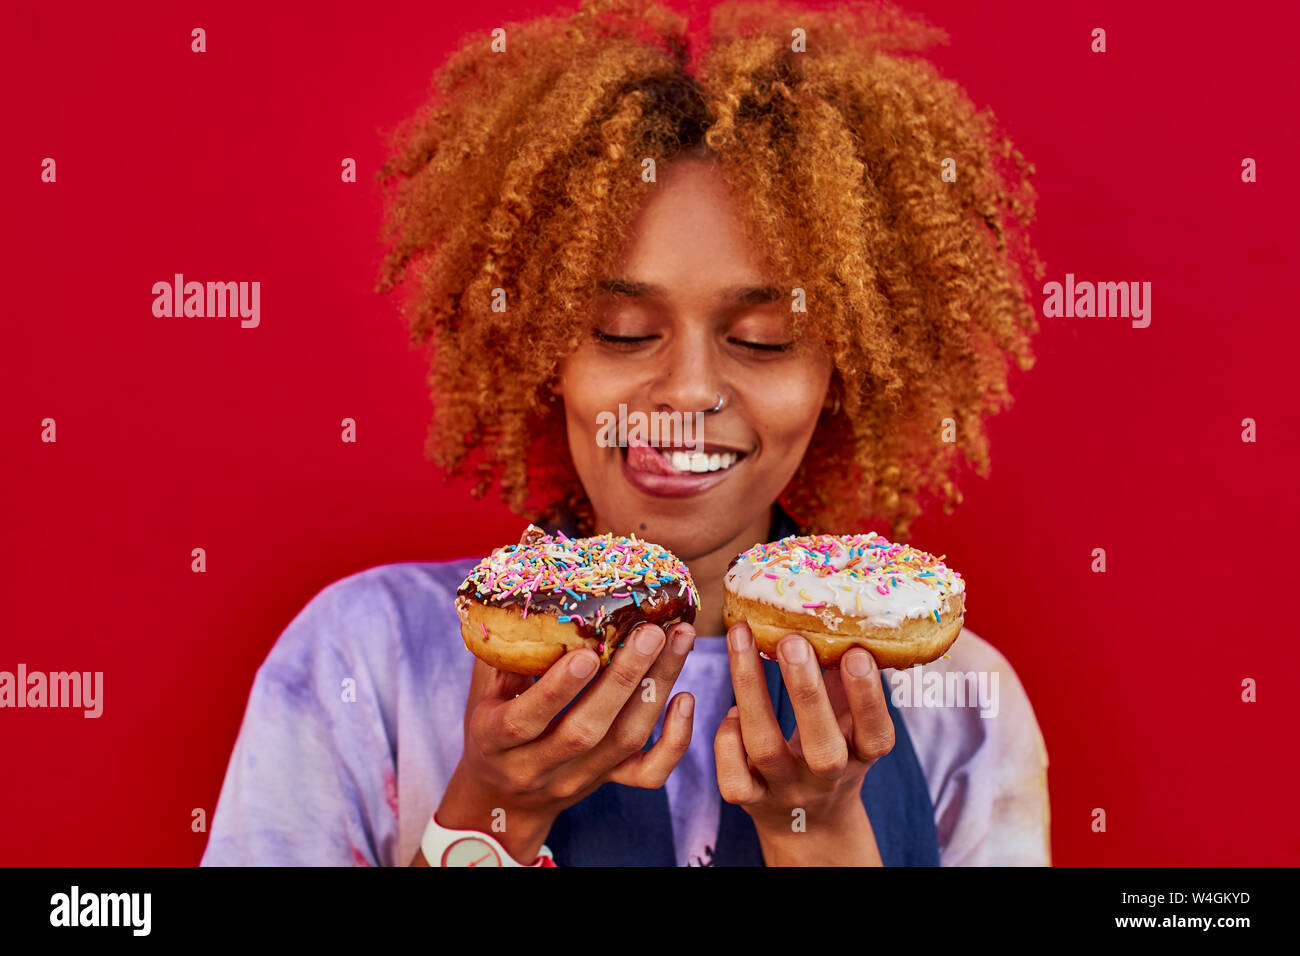 Woman choosing which donut to eat Stock Photo